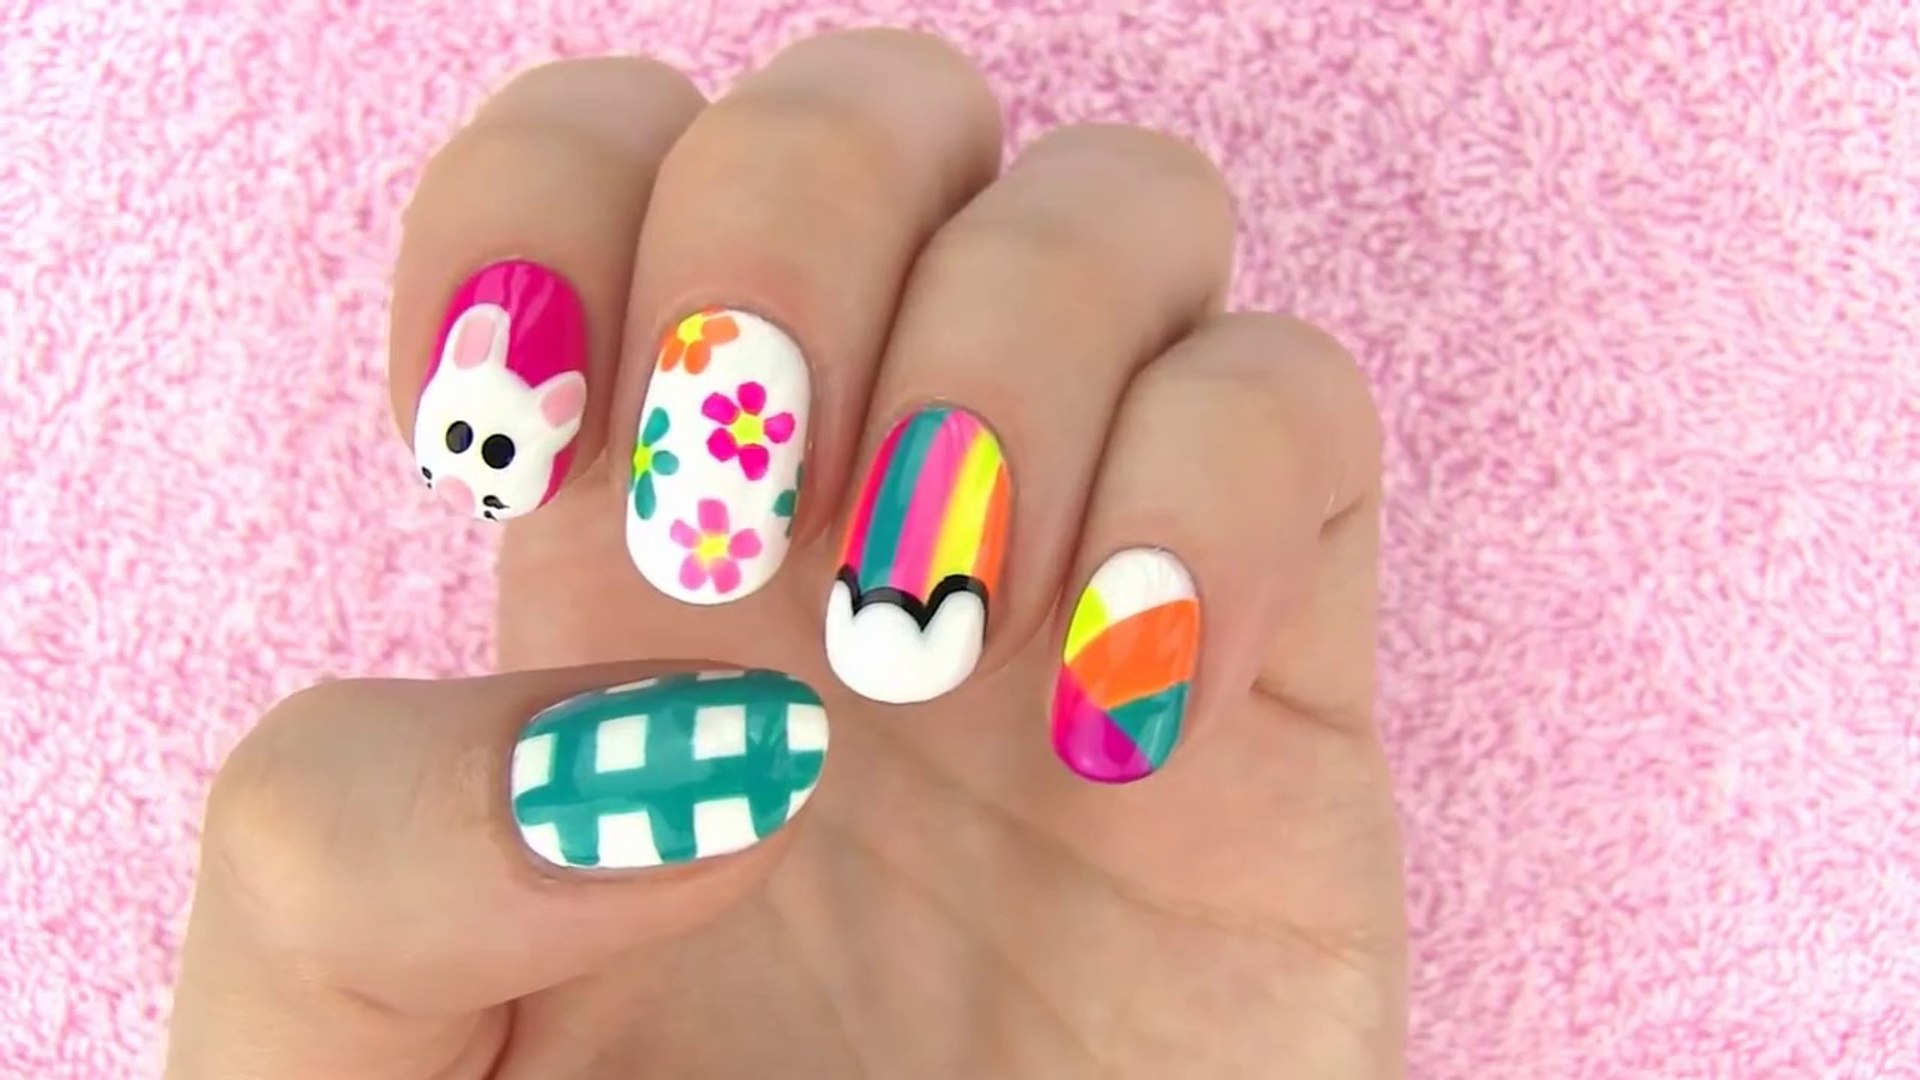 Nail Art Without any Tools! DIY Nail Designs with toothpick - video  Dailymotion